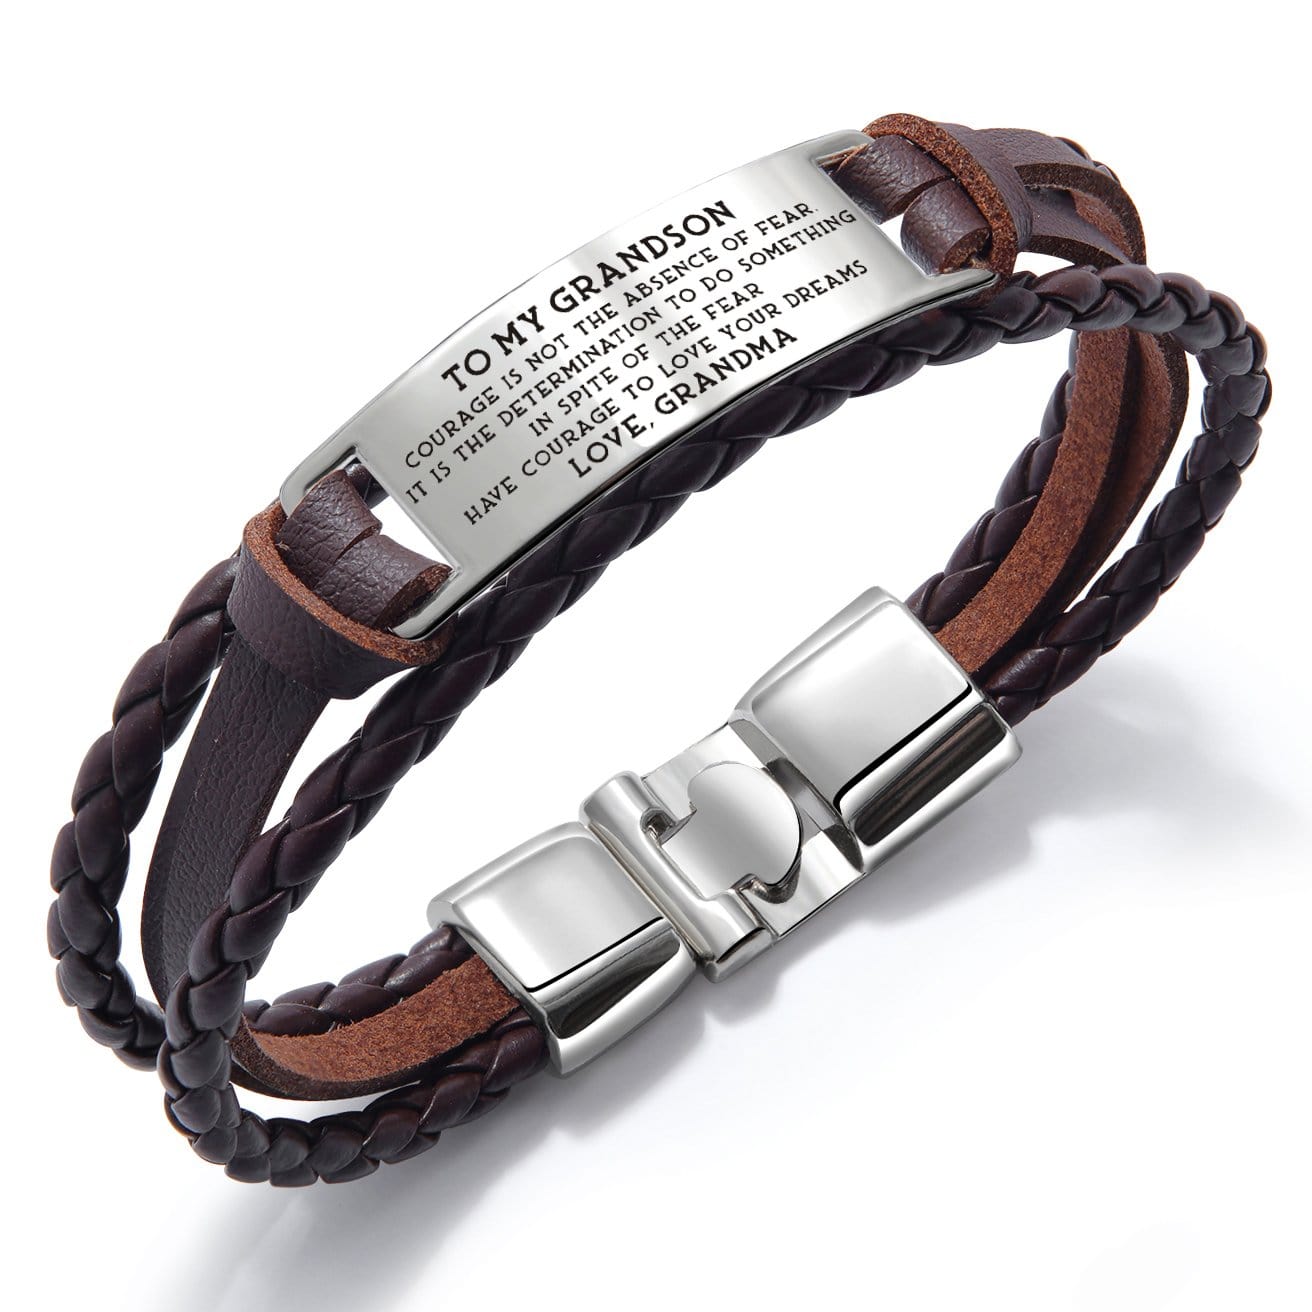 Bracelets Grandma To Grandson - To Love Your Dreams Leather Bracelet Brown GiveMe-Gifts